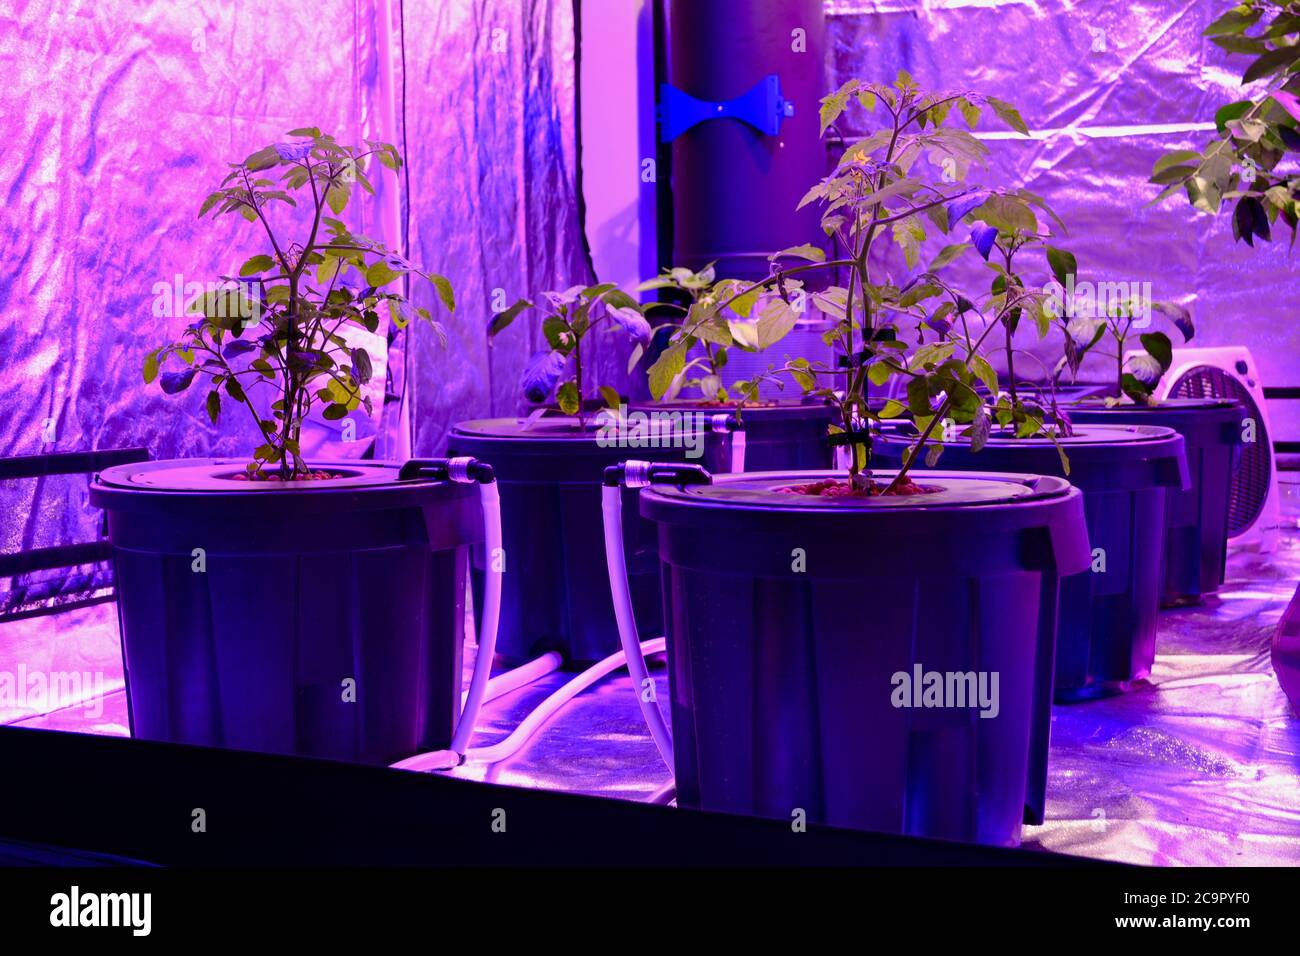 Aquaponics setup with phyto lamps which give strange red light. Vegetables growing in soilless substrate, structural details of the setup. Stock Photo